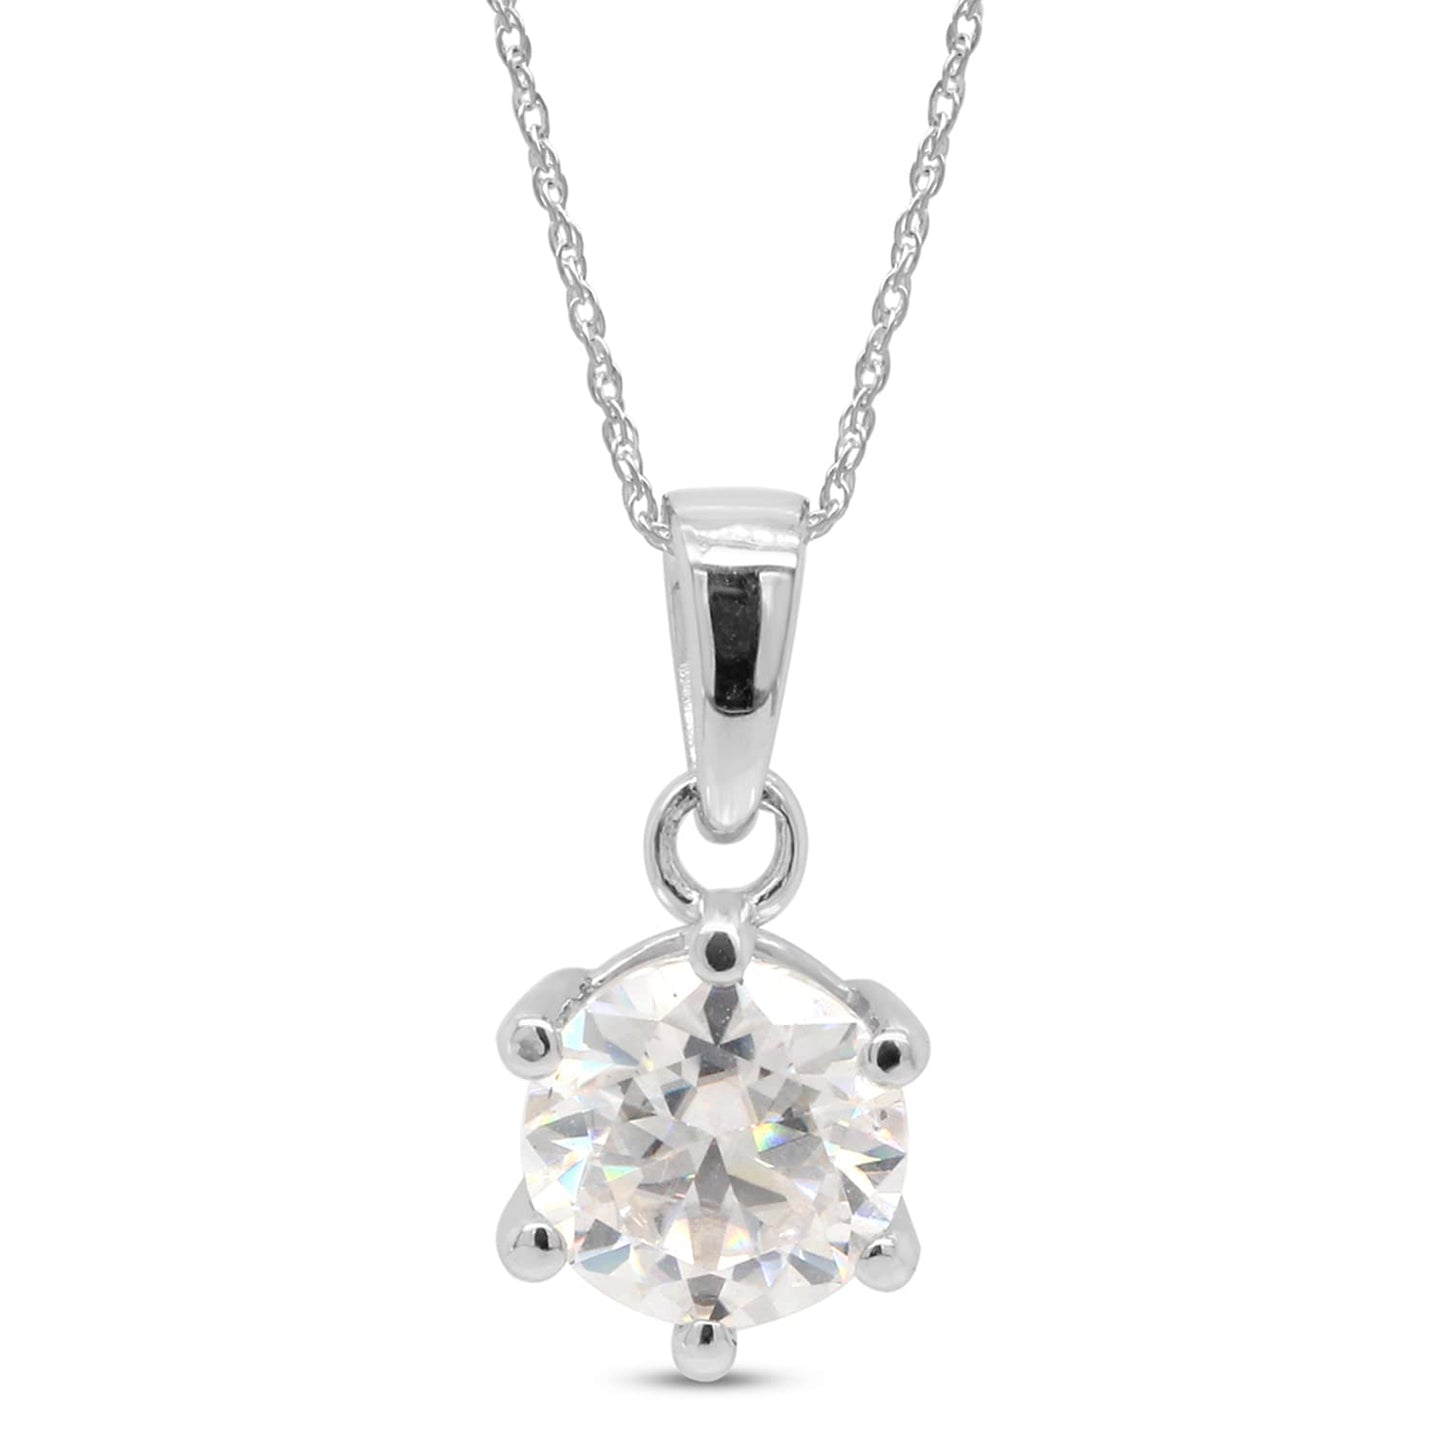 Load image into Gallery viewer, 1 Carat Round Cut 6.5MM Lab Created Moissanite Diamond Solitaire Pendant Necklace In 925 Sterling Silver (1 Cttw)
